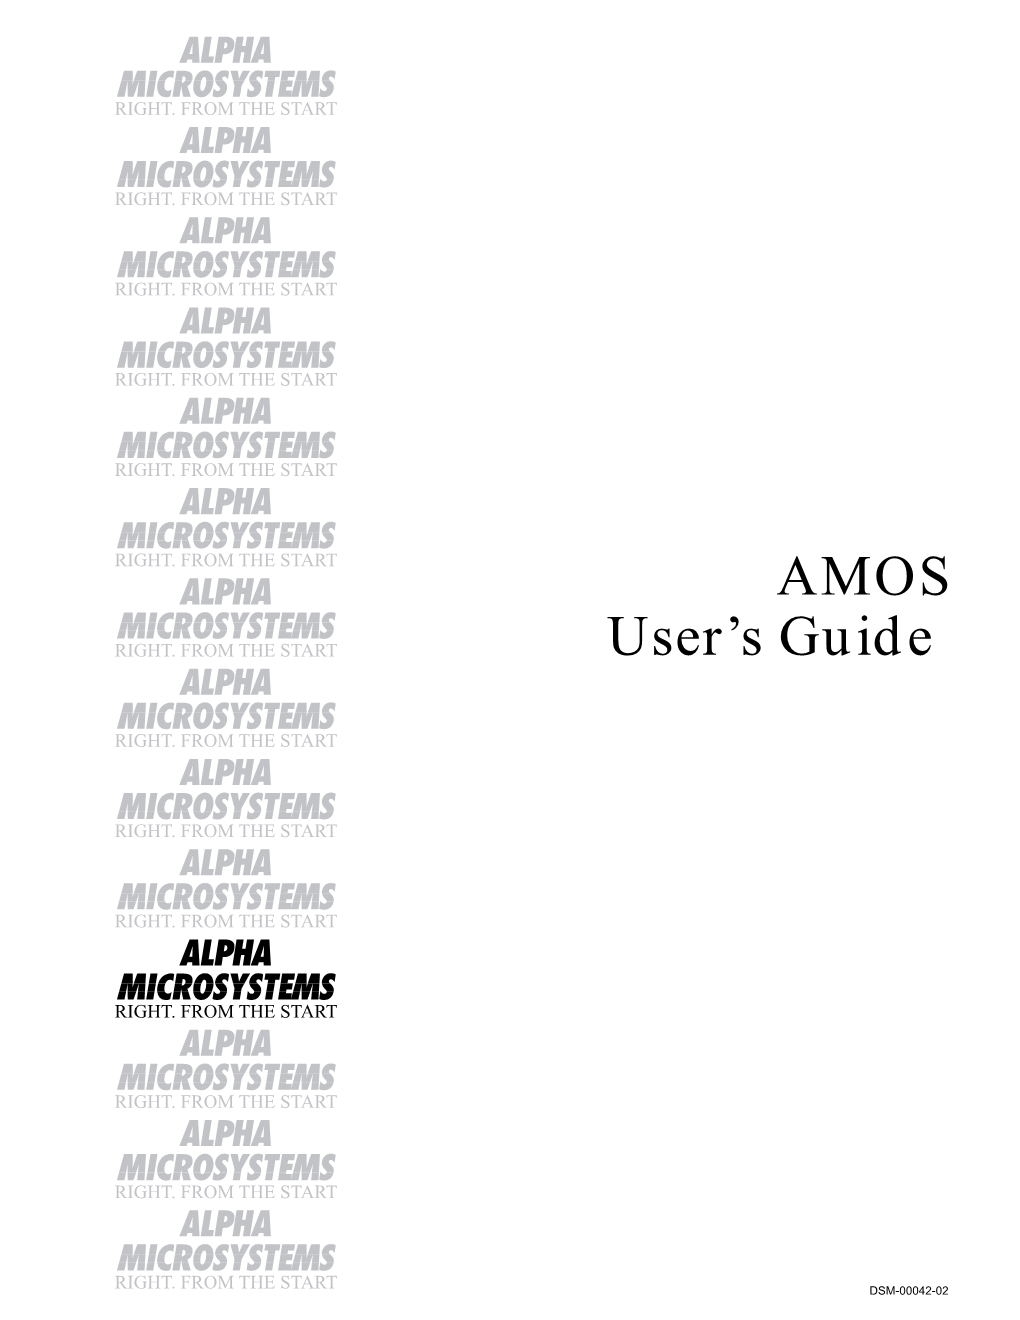 AMOS User's Guide to Re-Order This Document, Request Part Number DSO-00042-00